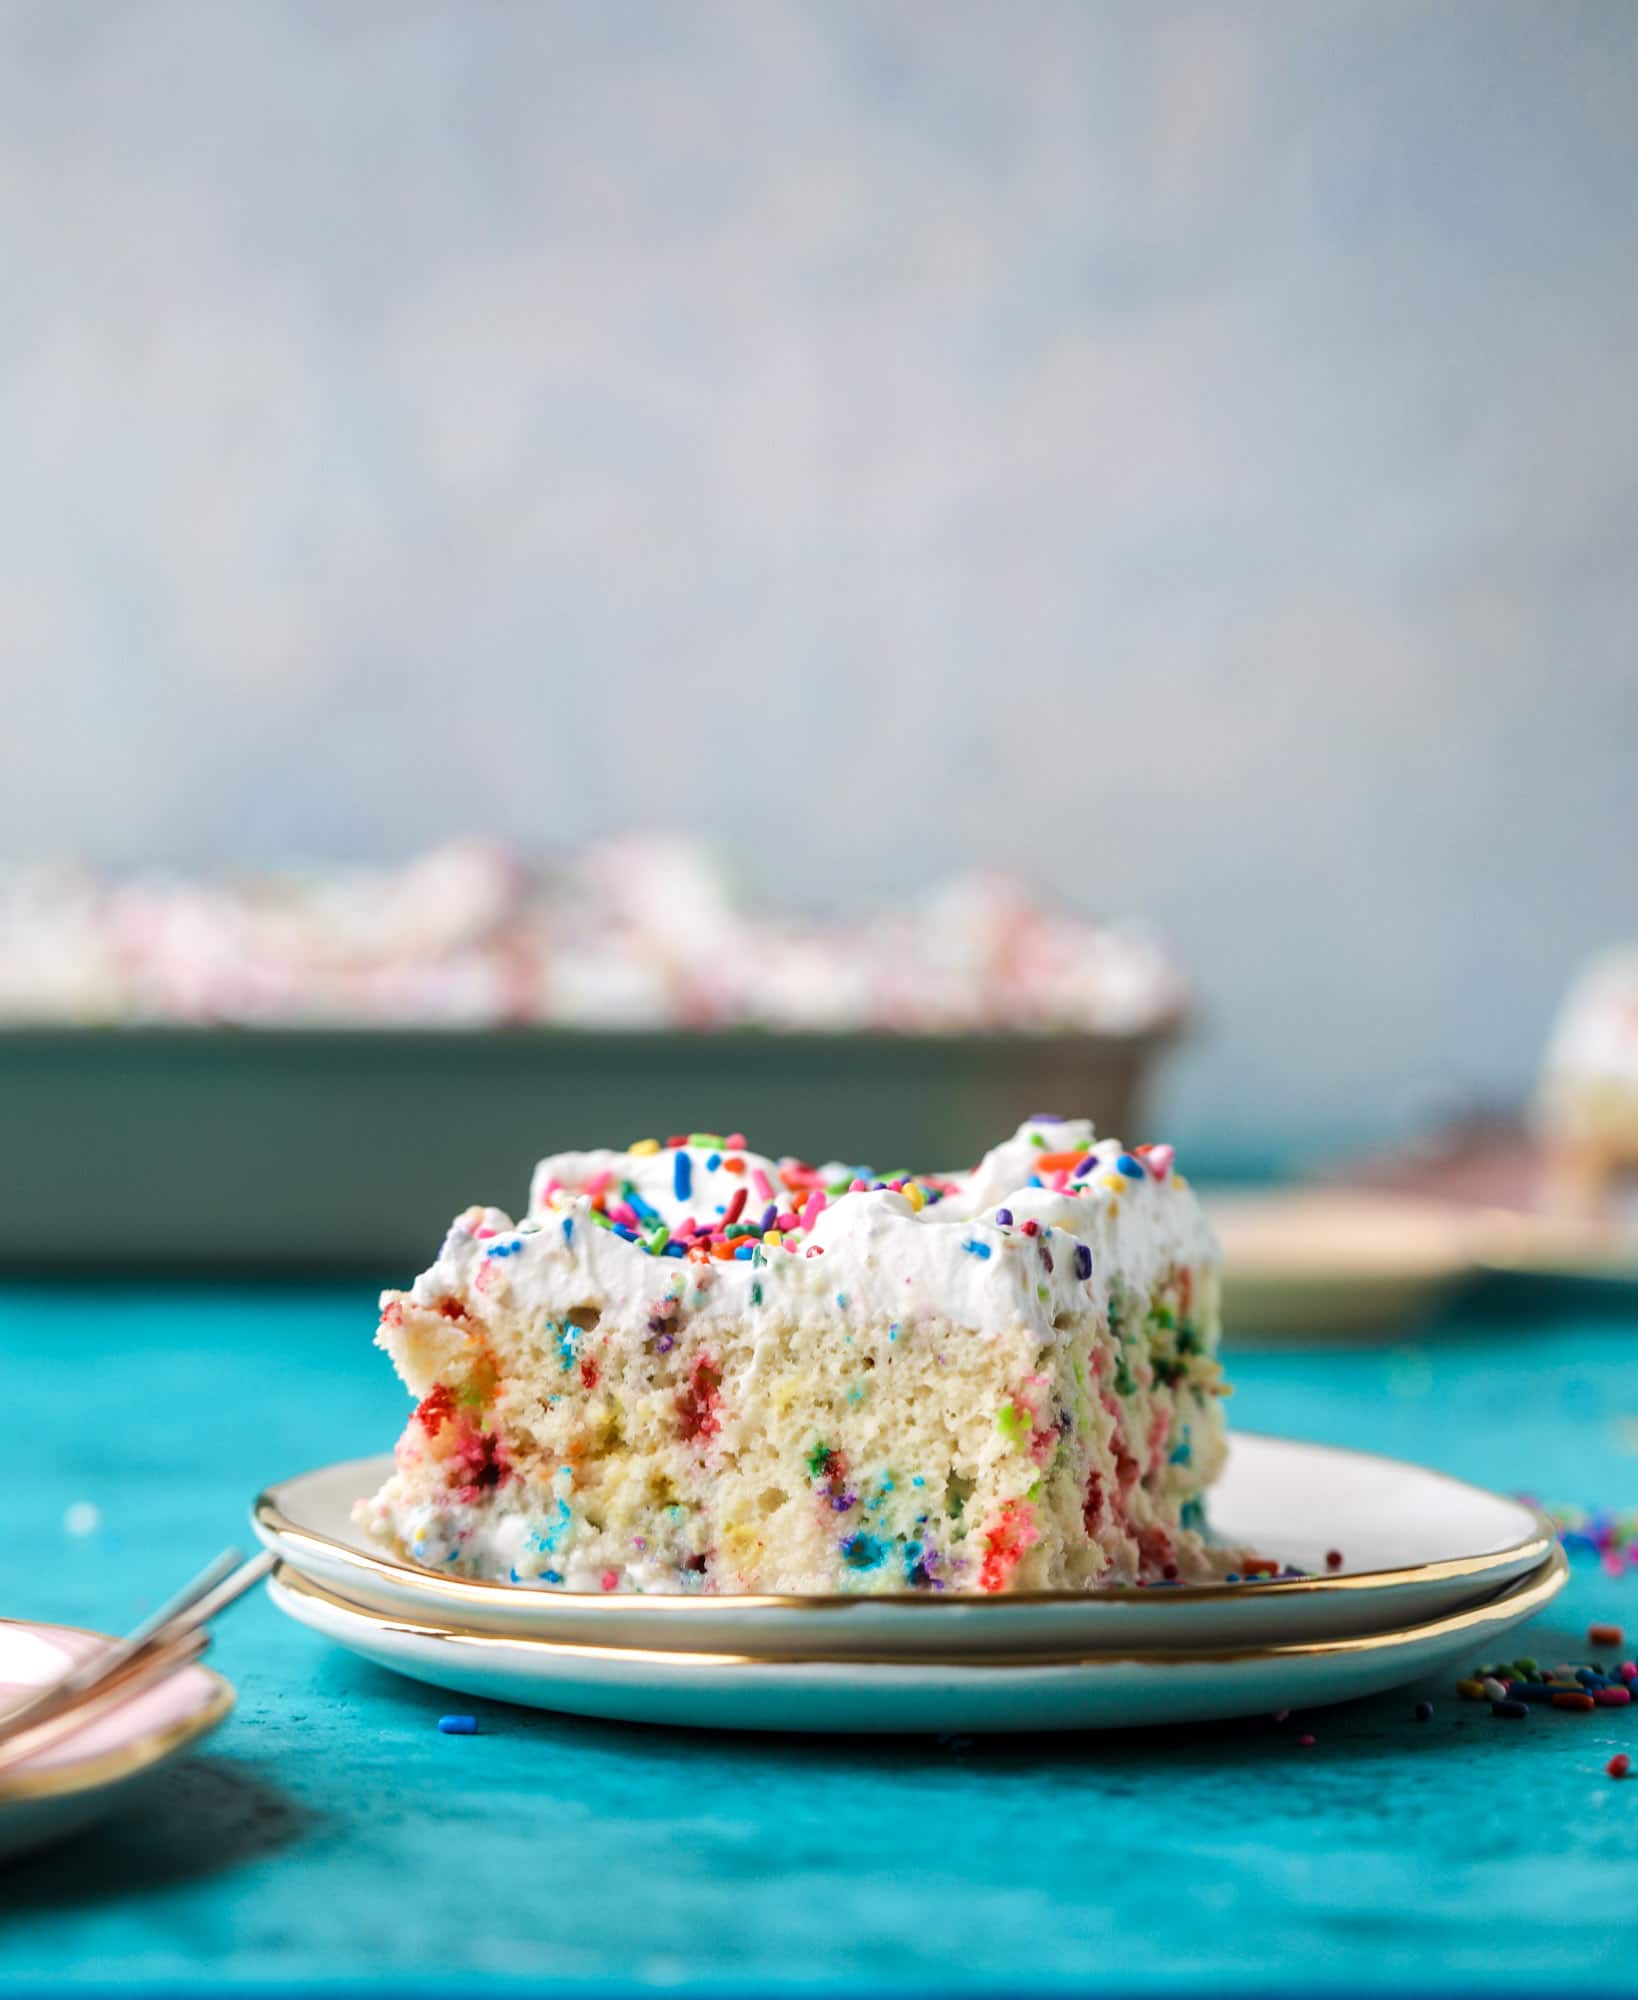 A sprinkled twist on the classic tres leches! Tres leches confetti cake is full of rainbow sprinkles and tastes like heaven. So easy to make!